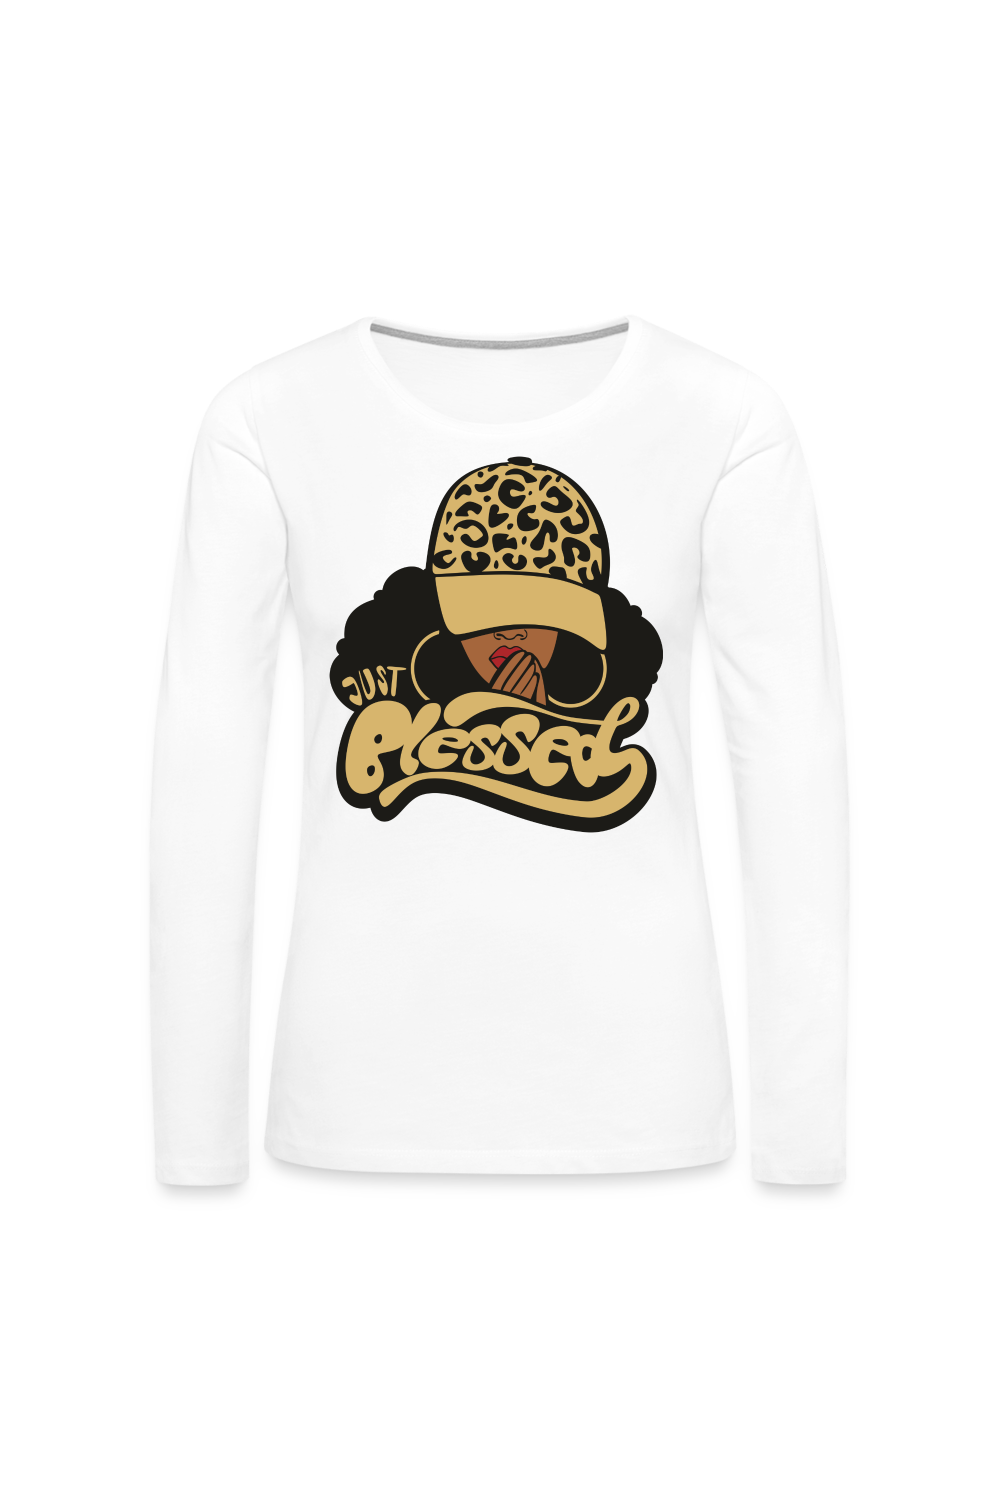 Women's Gold Just Blessed  Long Sleeve T-Shirt - white